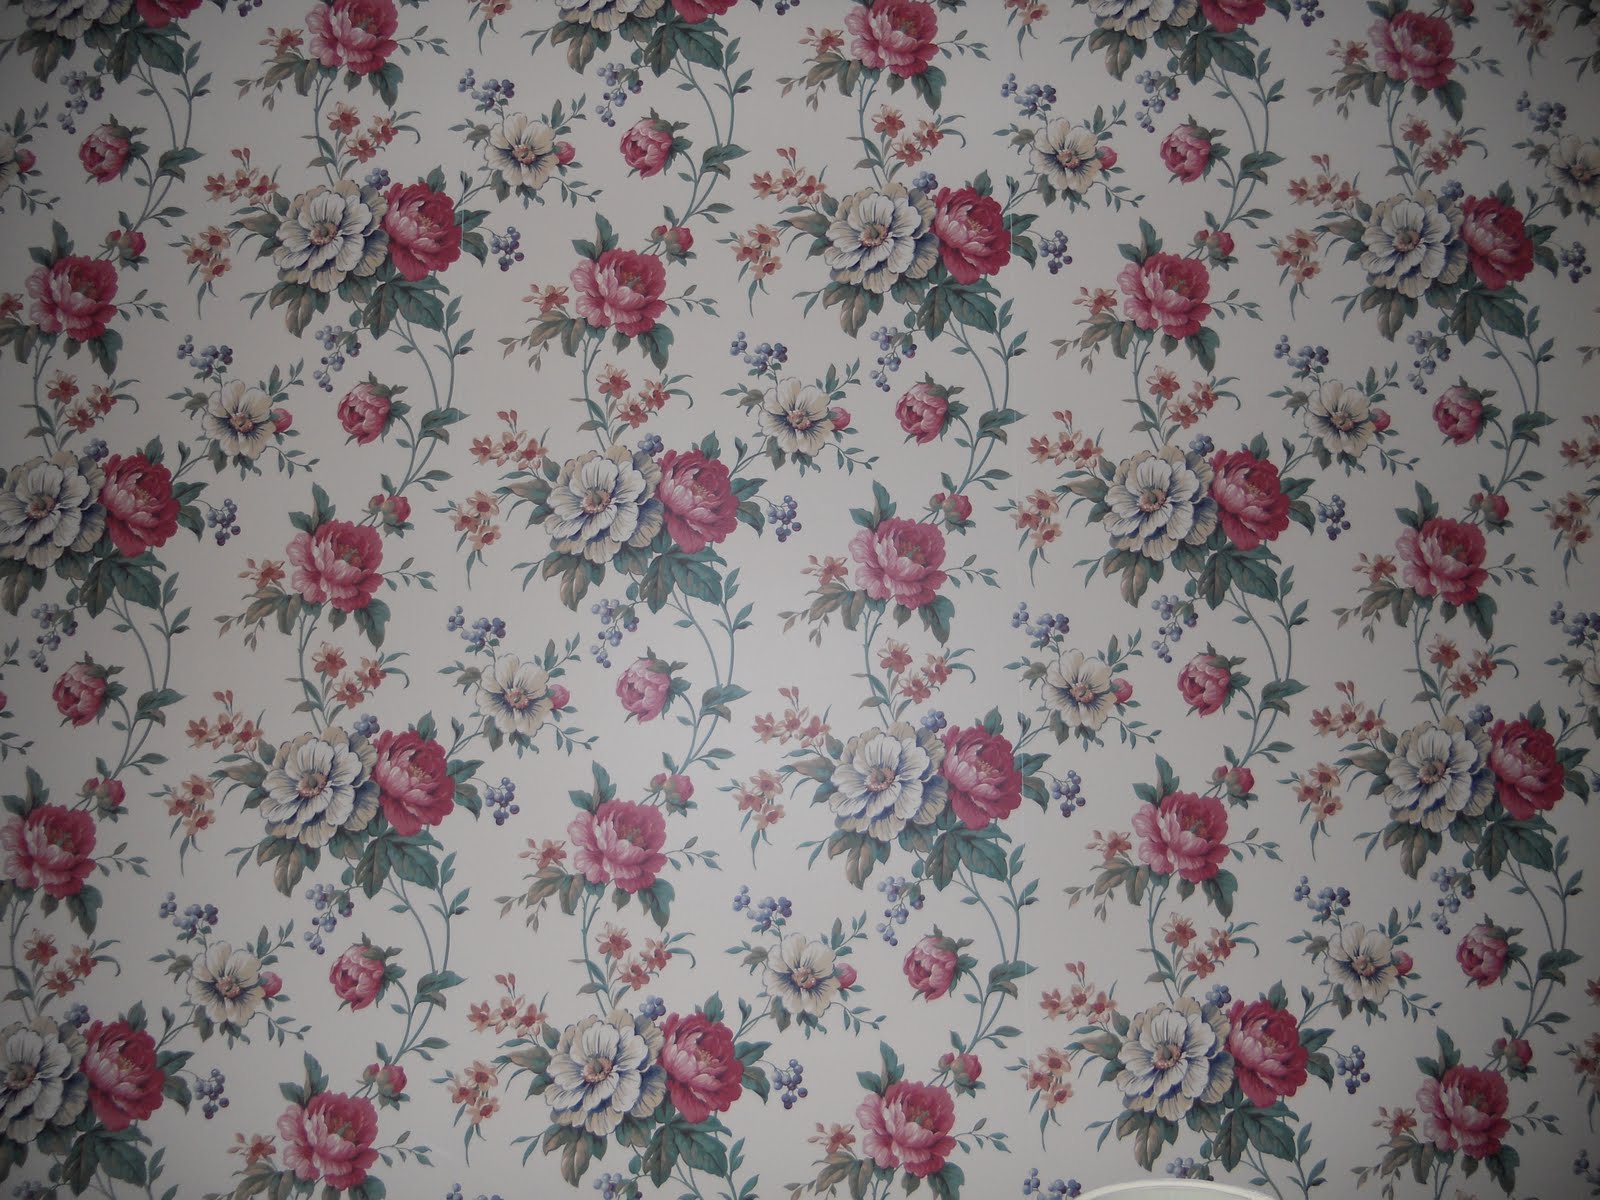 Check Out The Extreme Floral Wallpaper Pattern Found In